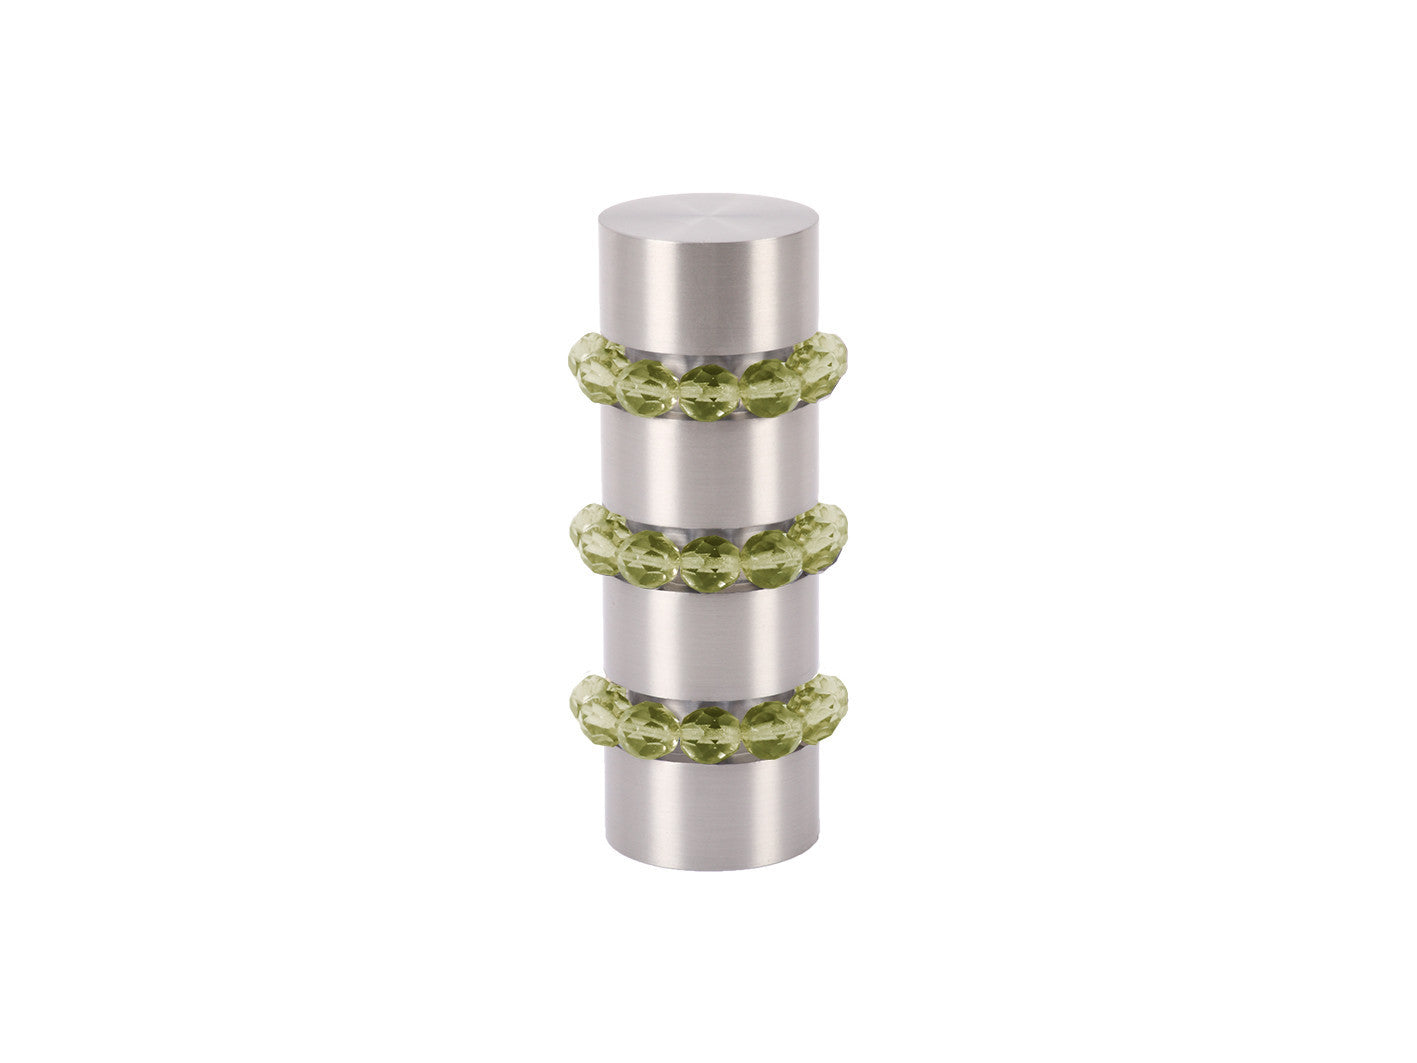 Beaded stainless steel curtain pole finial in olive green glass | Walcot House 19mm collection